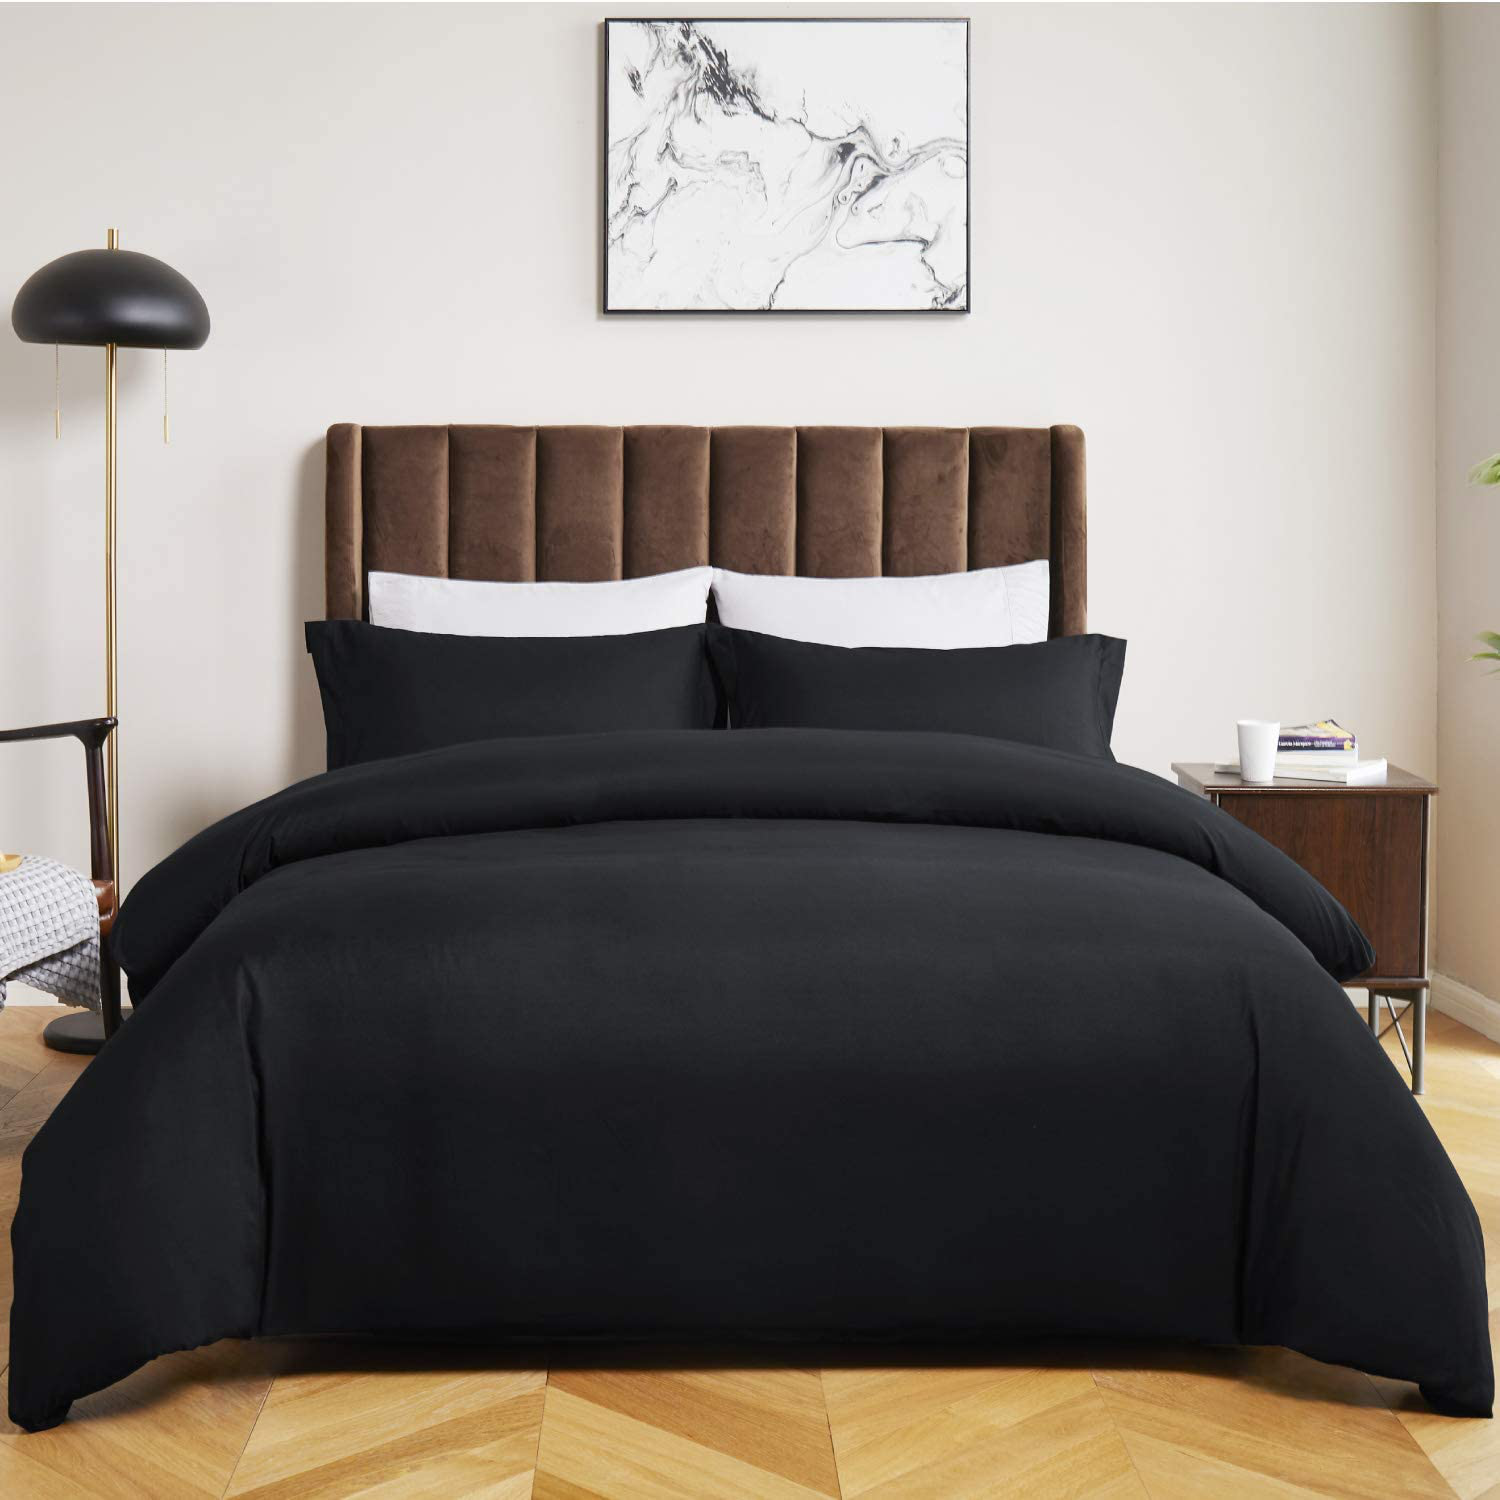 Bedsure Twin Duvet Cover Set Dark Grey - Brushed Microfiber Soft Duvet Cover Twin 2 Pieces with Zipper Closure, 1 Duvet Cover 68x90 inches and 1 Pillow Sham